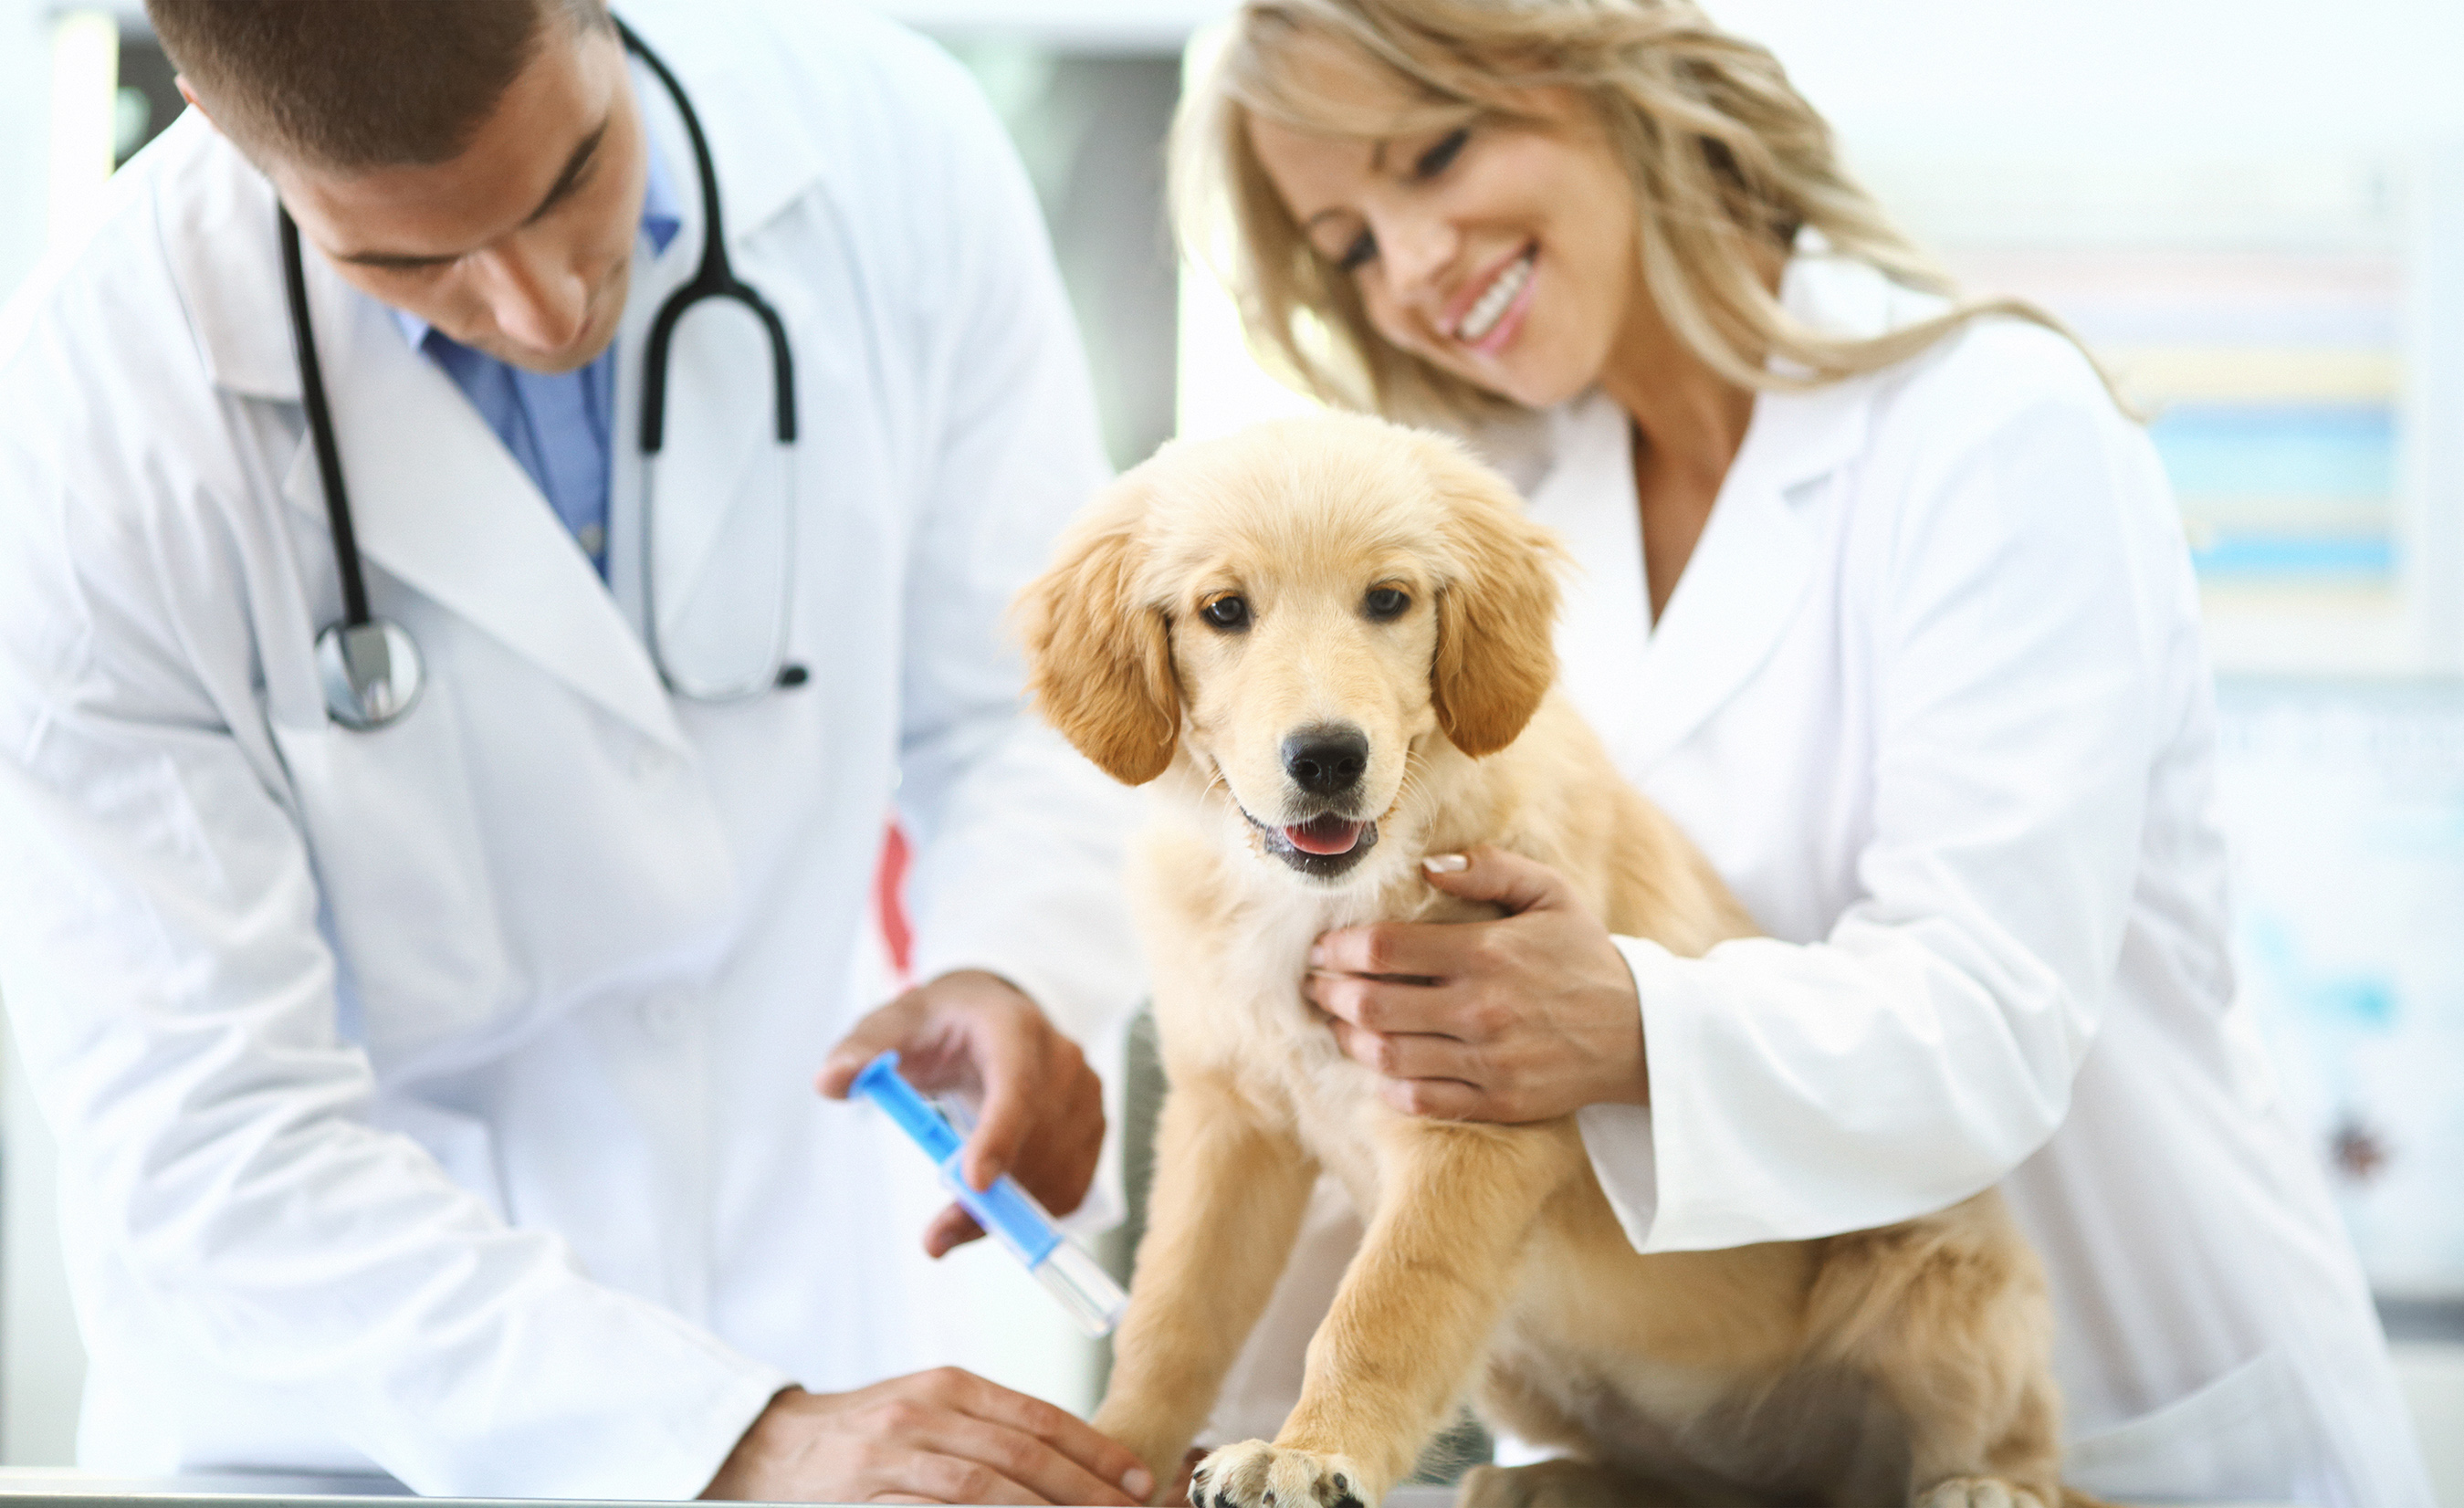 On behalf of its pet and vet financial solutions – CareCredit and Pets Best – Synchrony commissioned the “Lifetime of Care” study to help shed light on the lifetime cost associated with pet care.